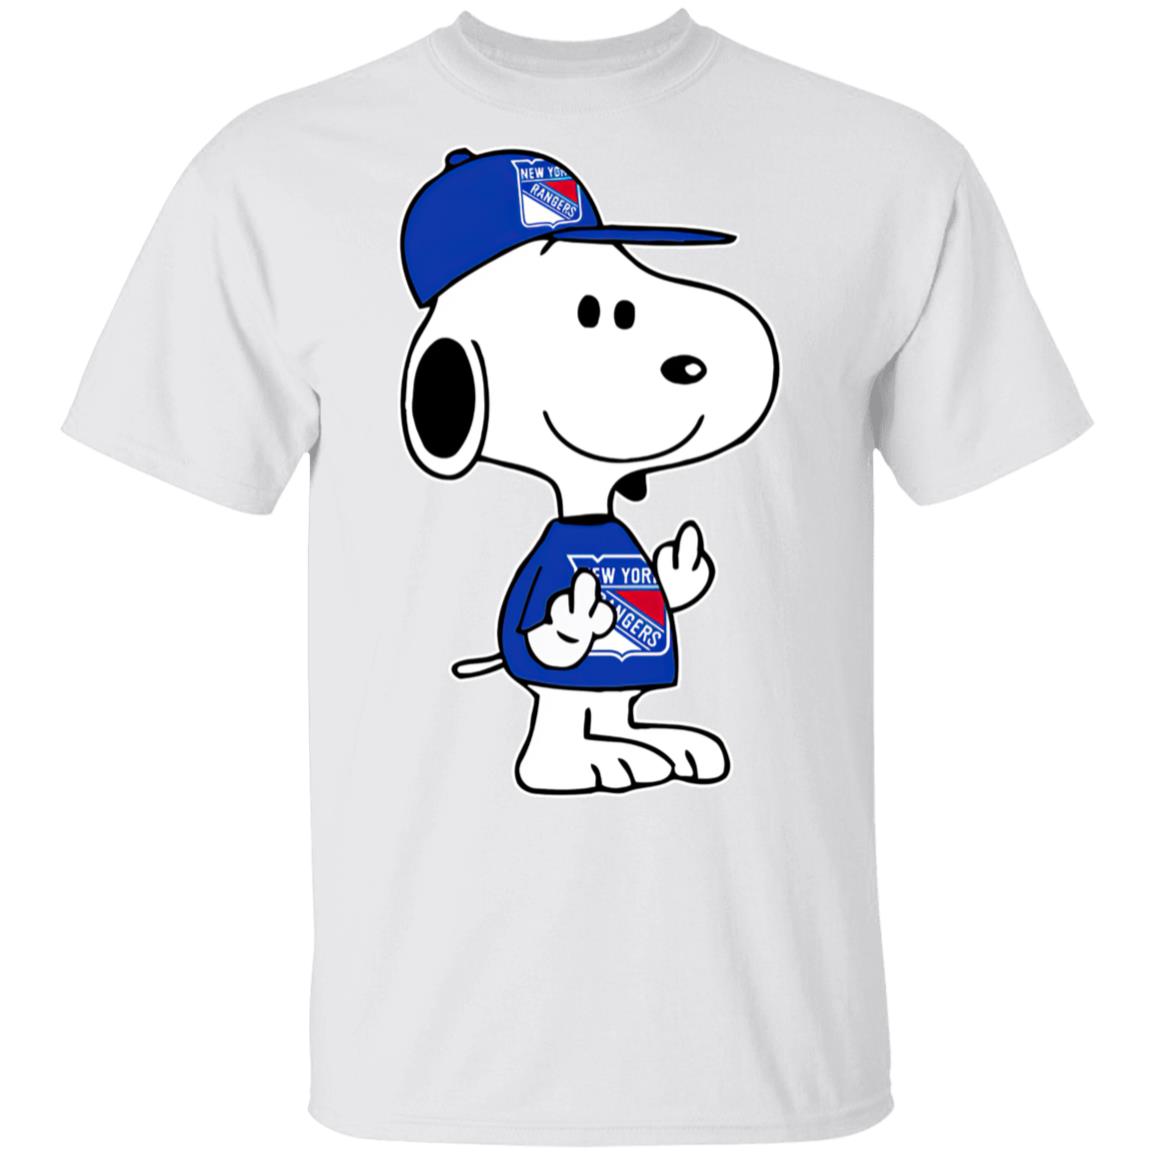 NHL New York Rangers Jersey for Dogs & Cats, Small. - Let Your Pet Be A  Real NHL Fan! New York Rangers Small NHL Dog Jersey